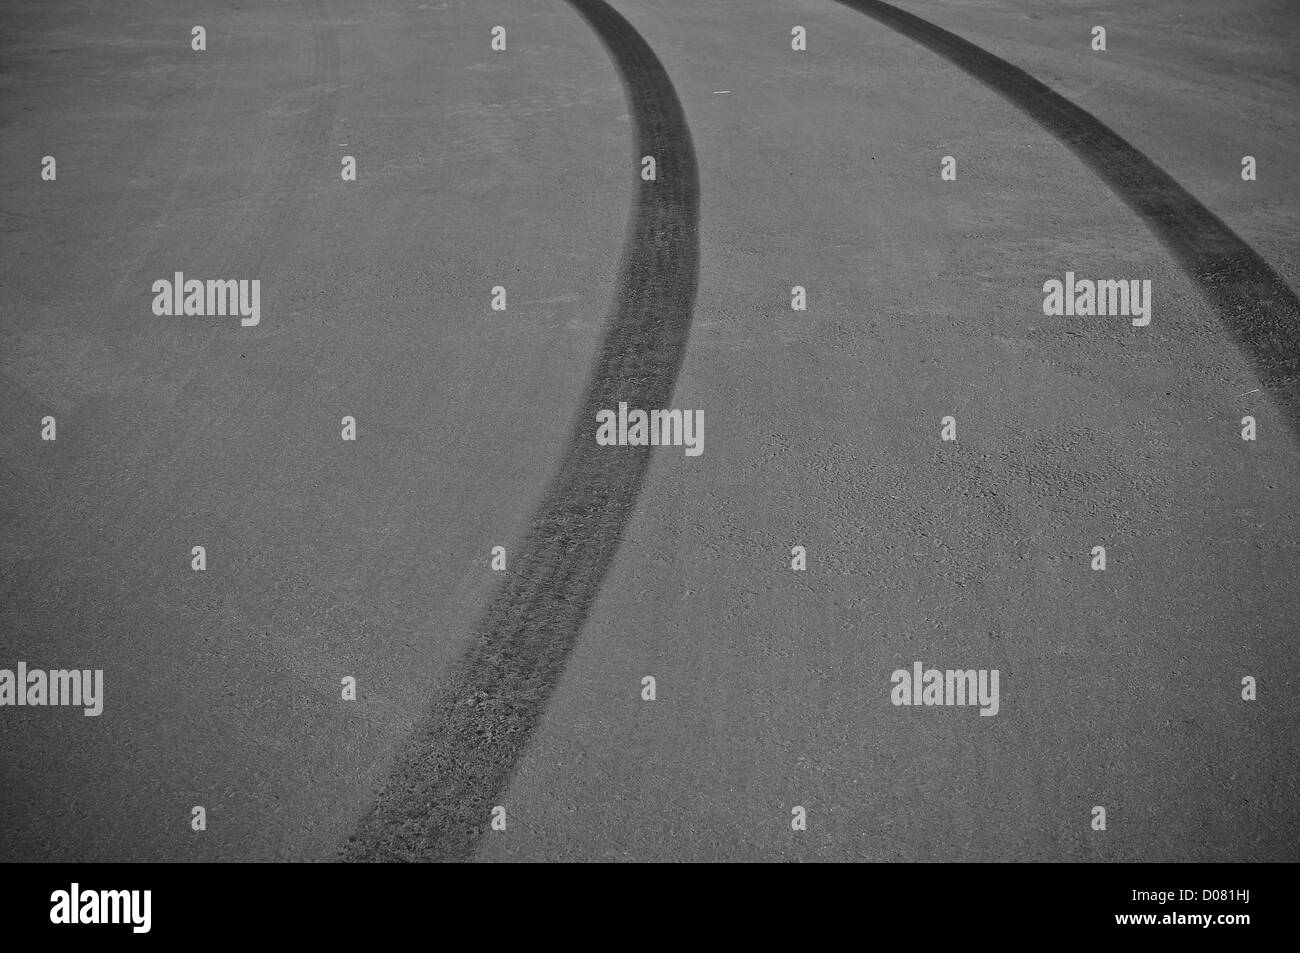 Tire Skid Marks from dangerous driving accident Stock Photo